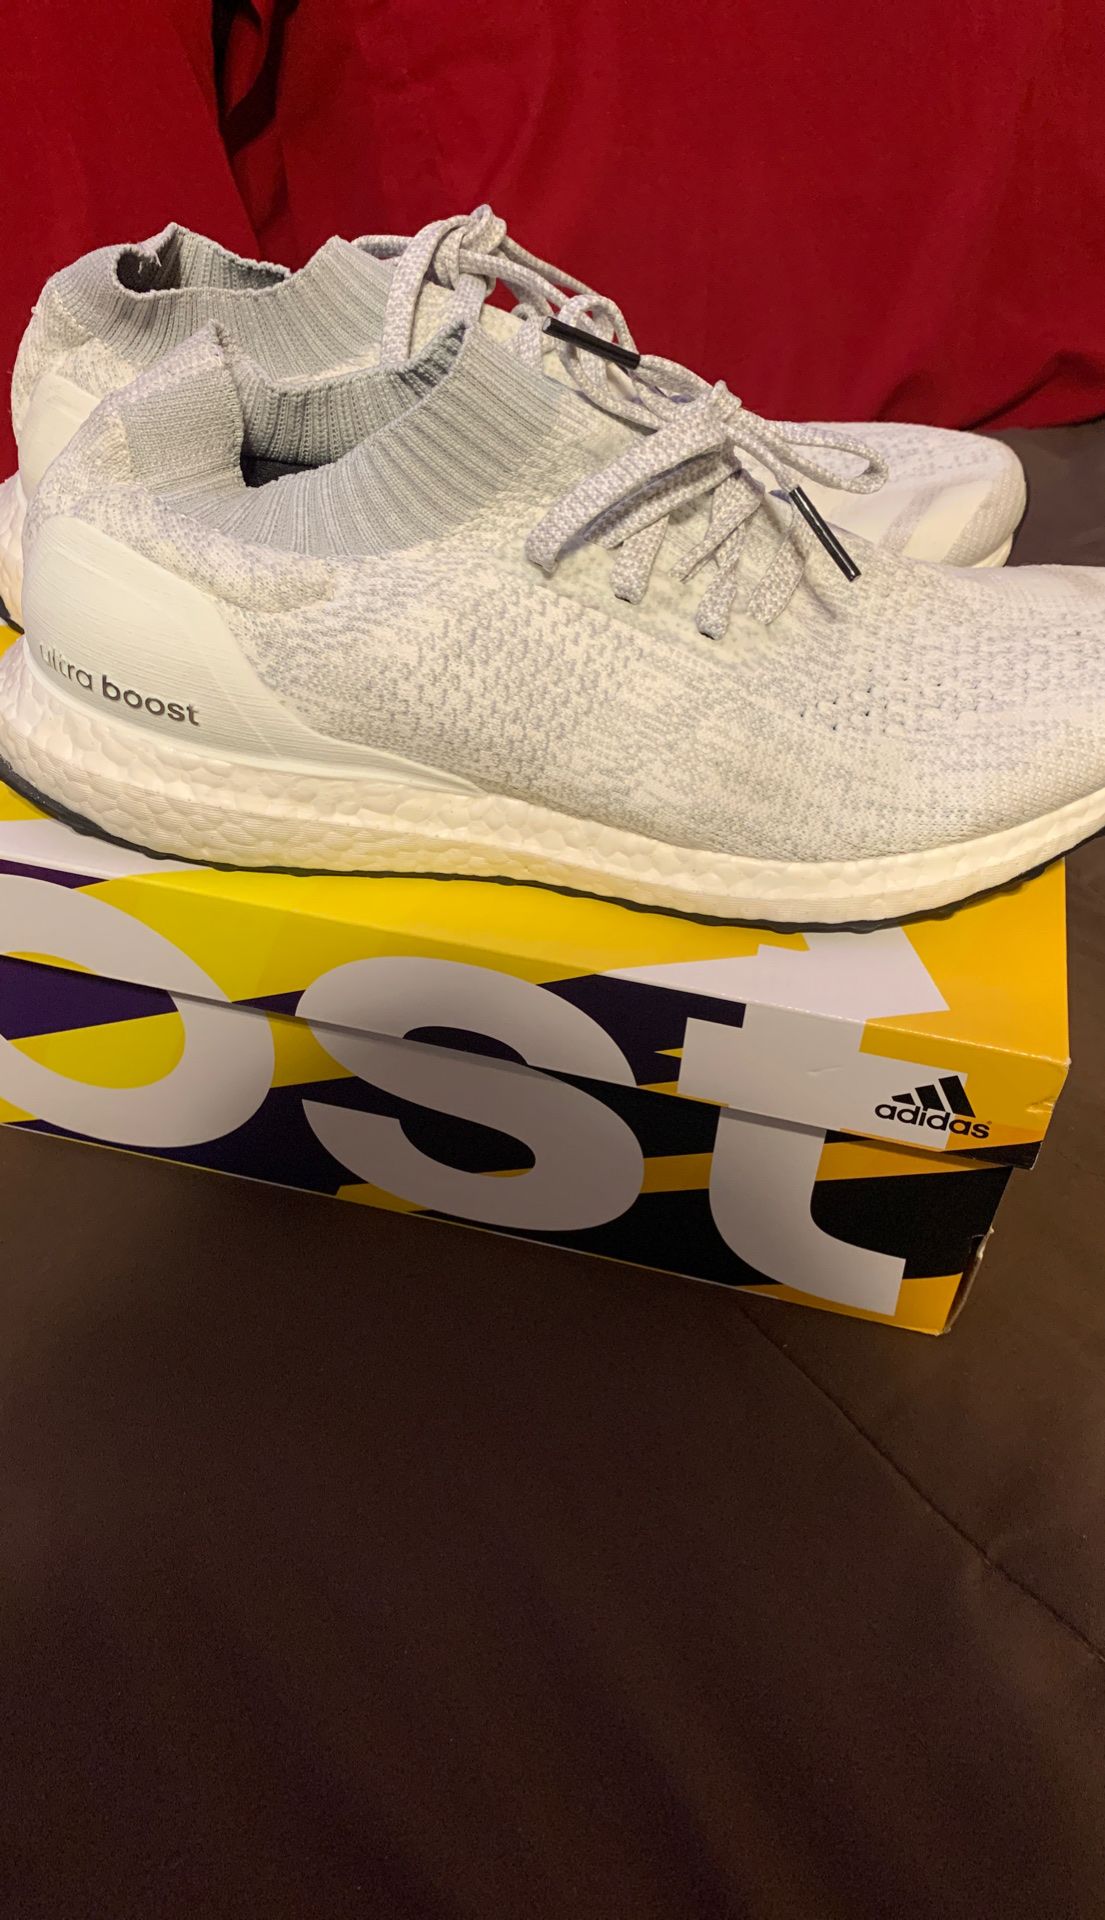 Adidas UltraBOOST uncaged size 11.5